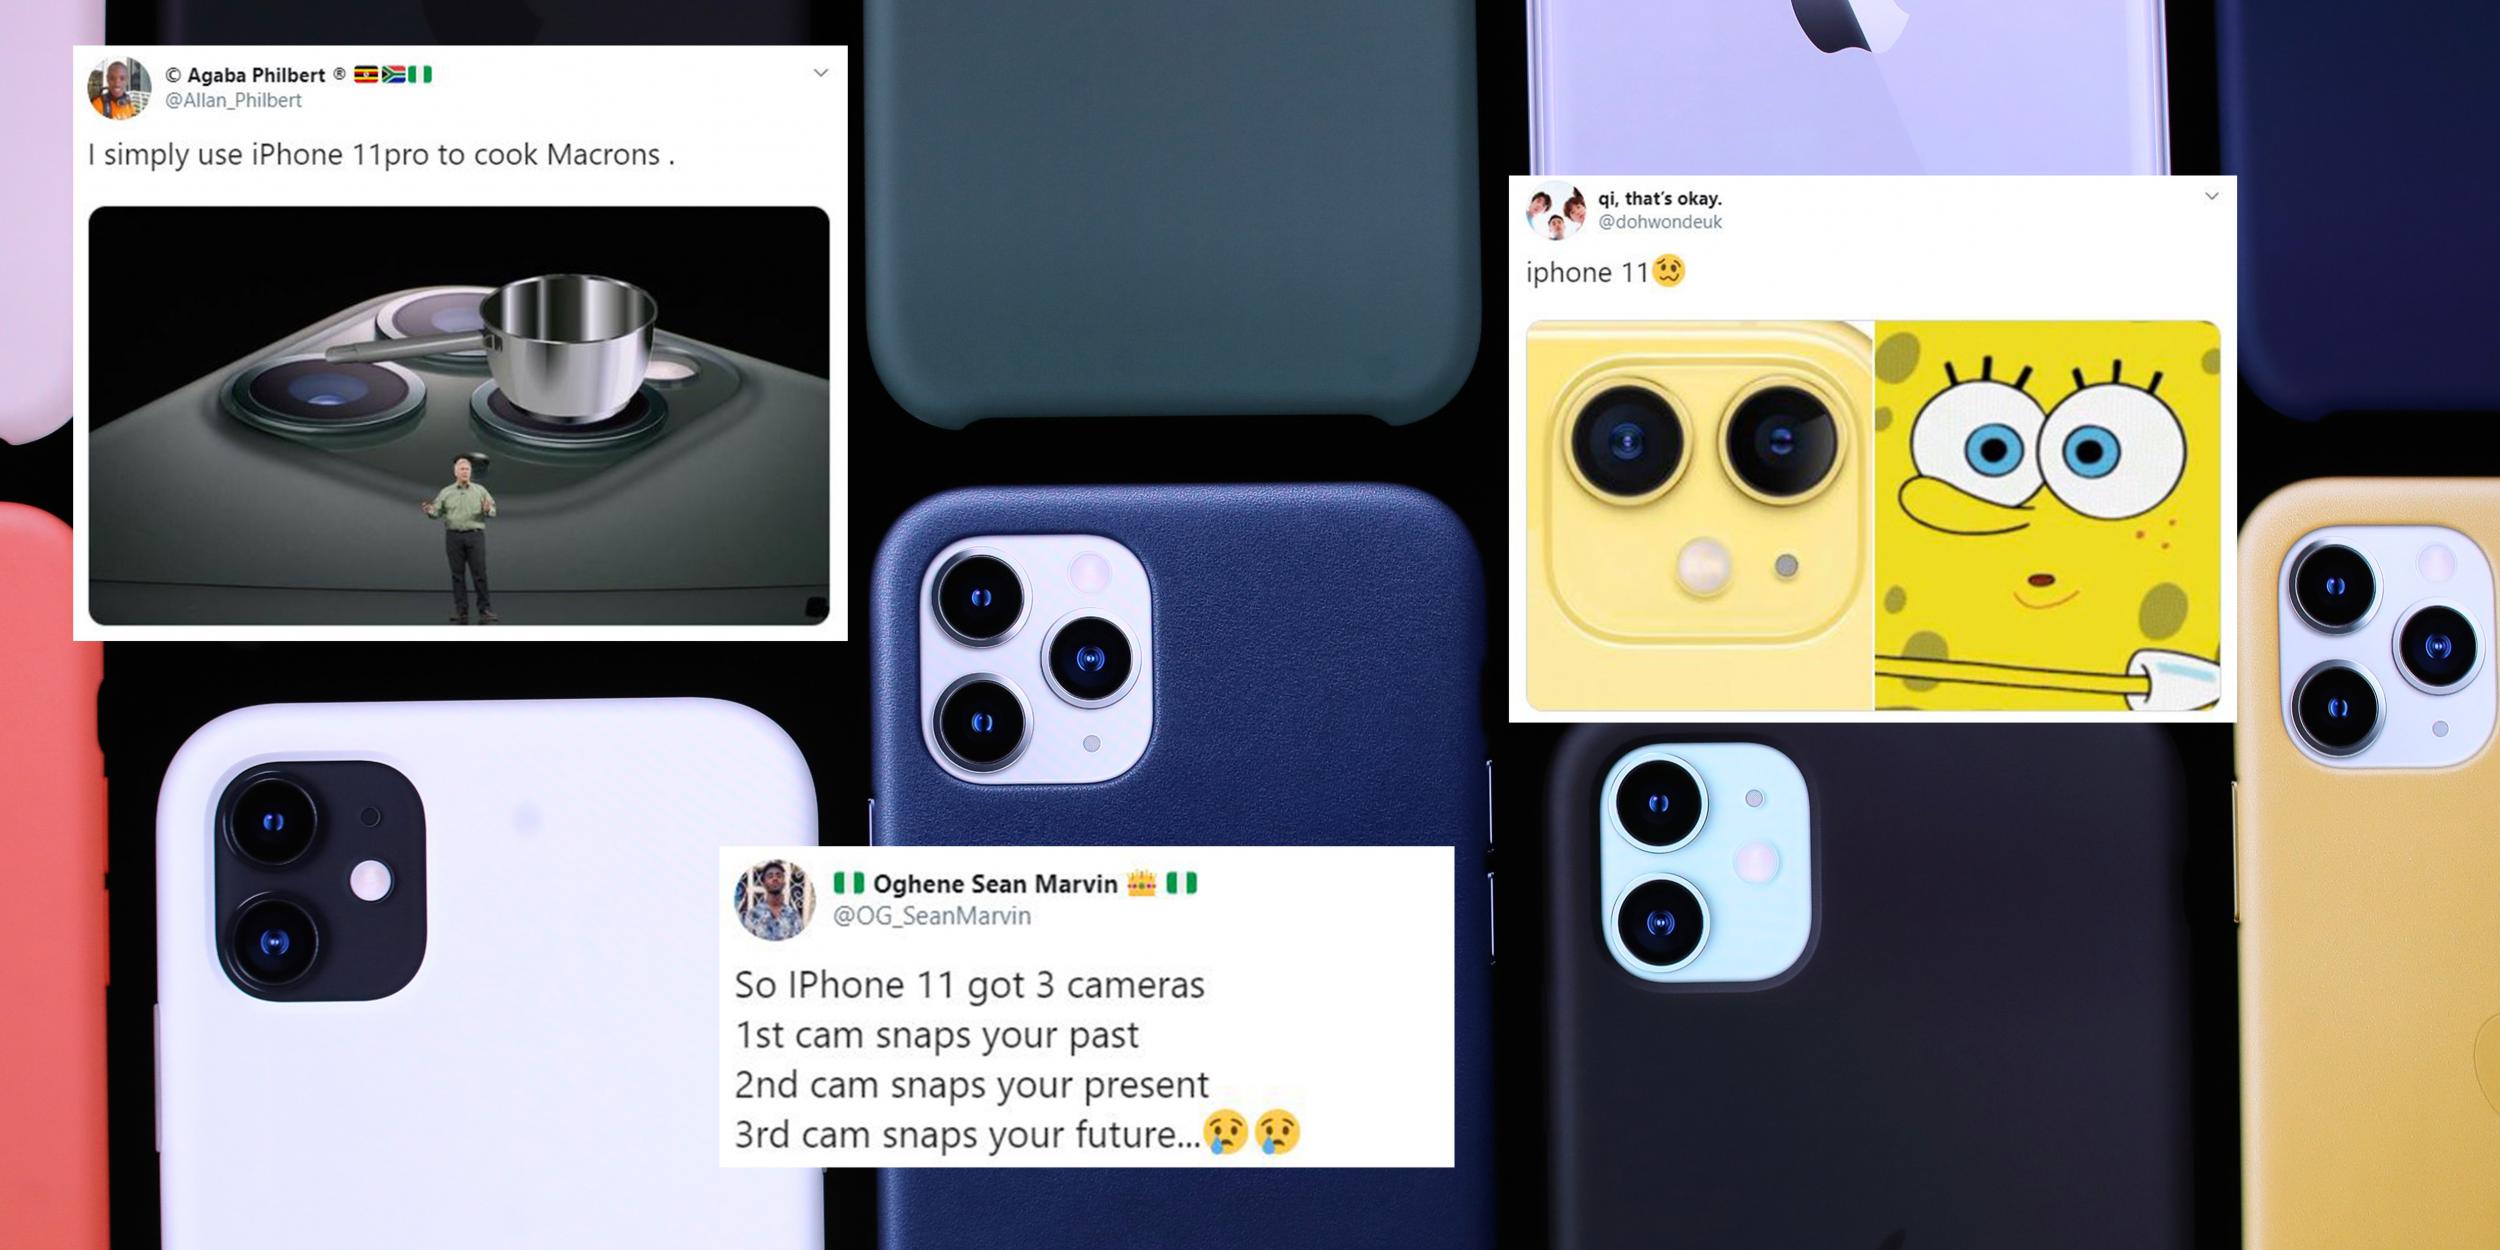 Iphone 11 Apple S Latest Design Has Been Given The Meme Treatment